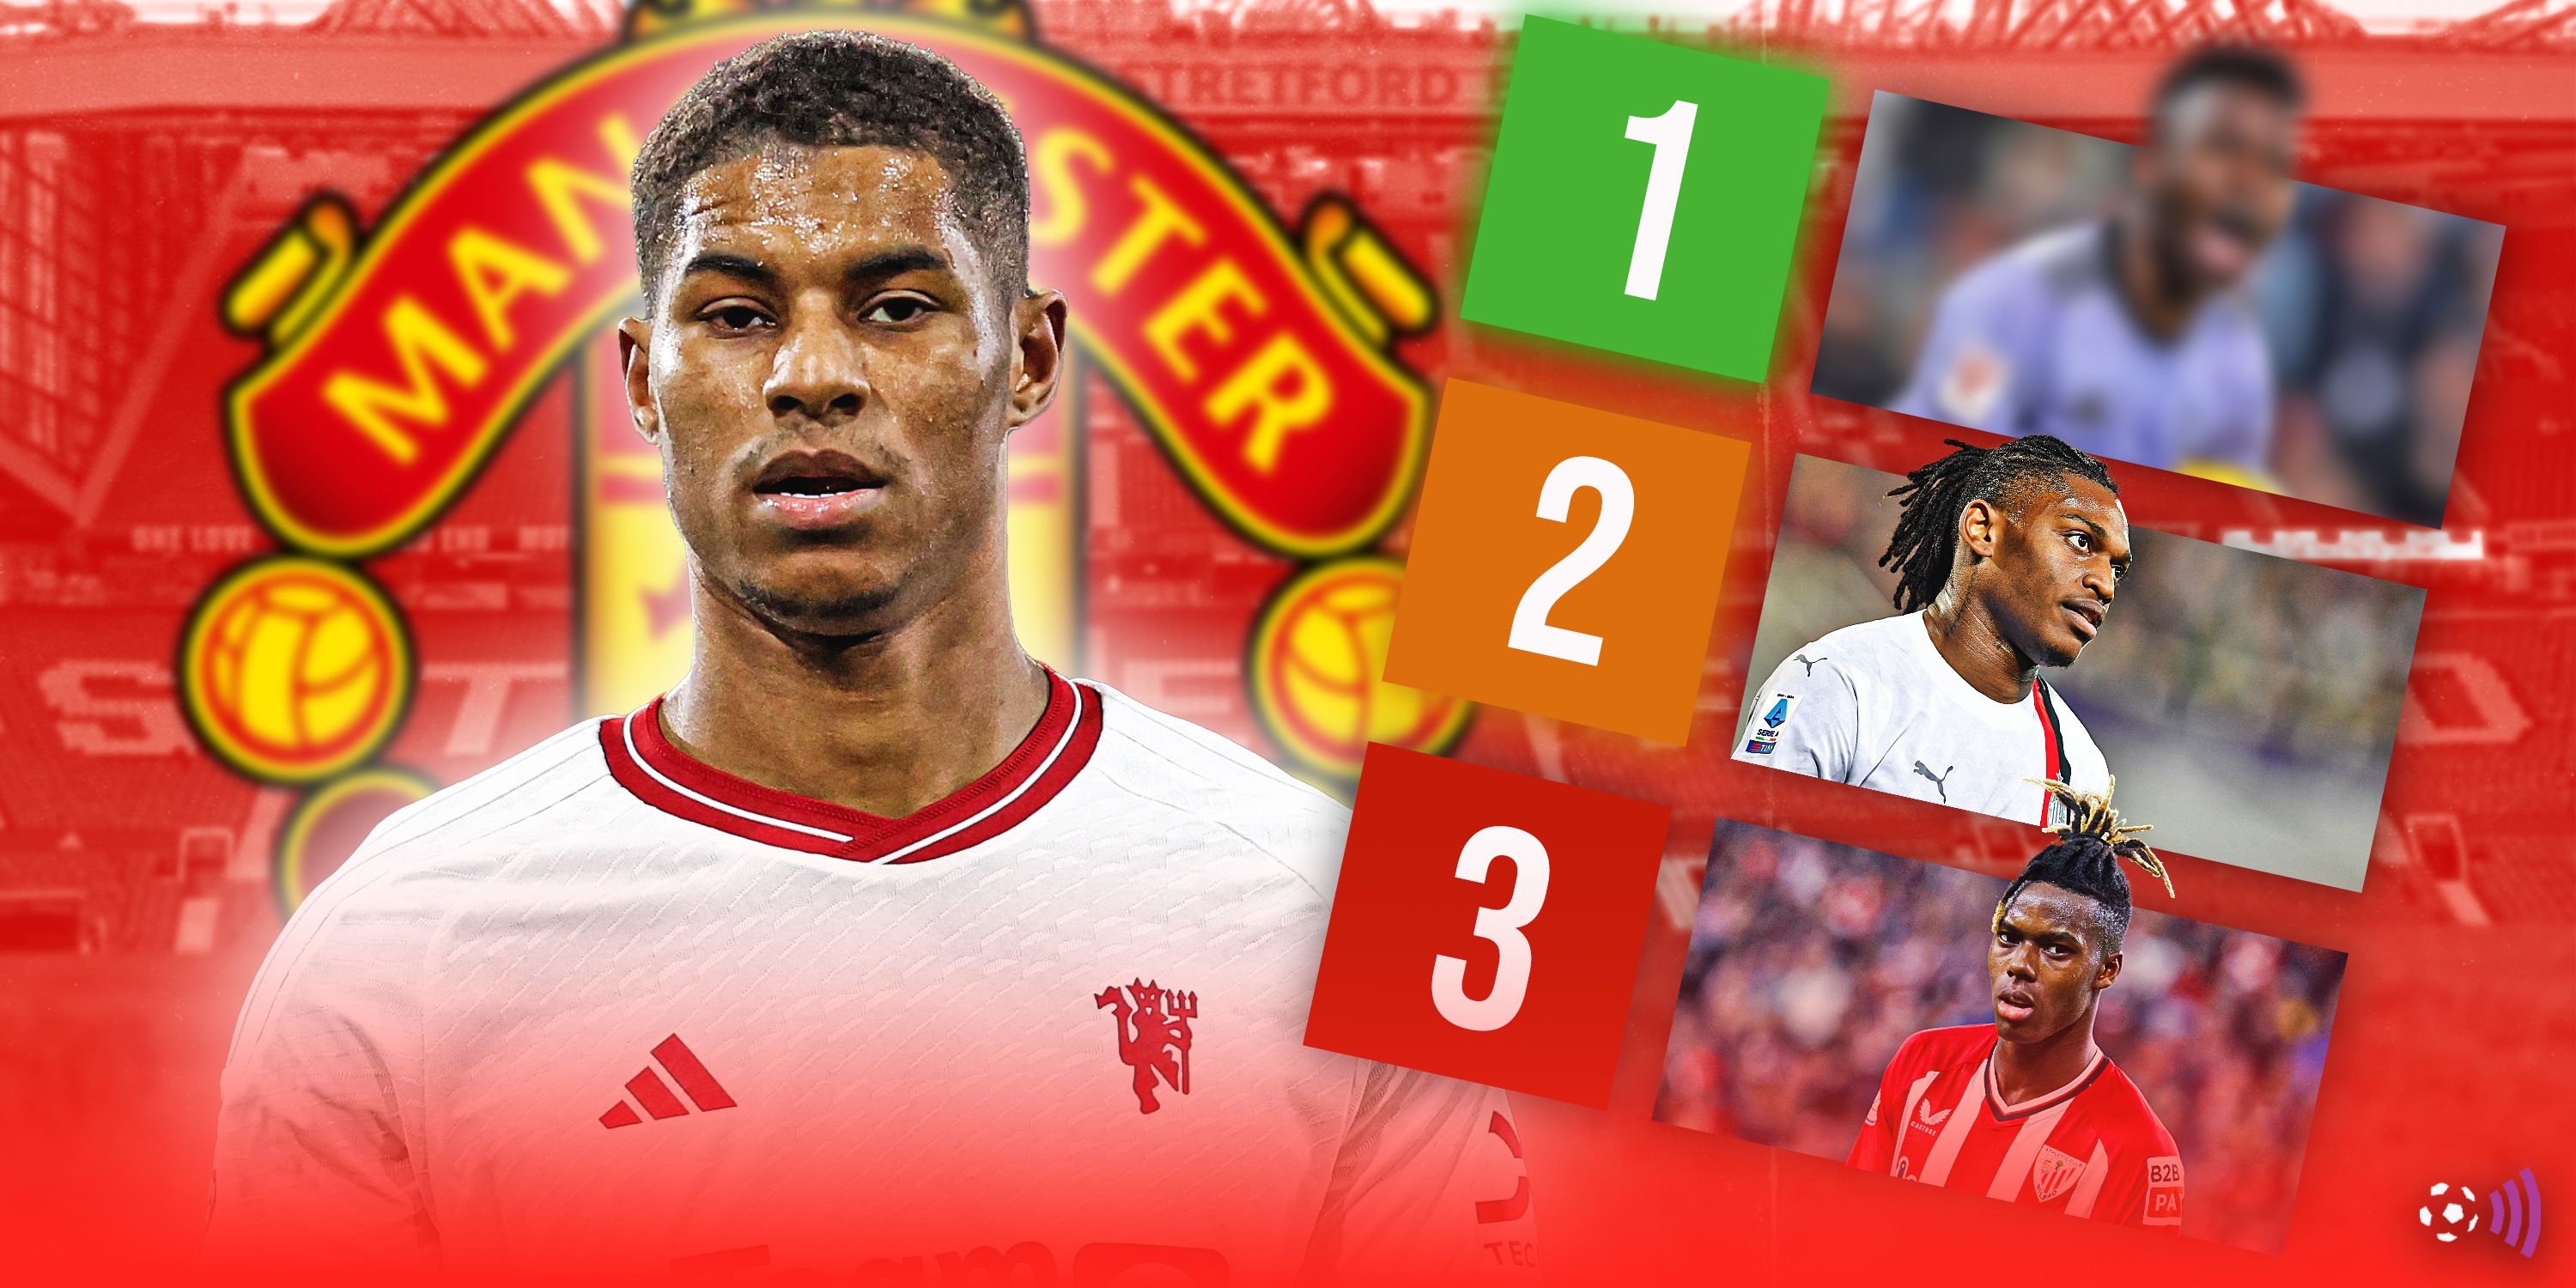 ineos have 3 perfect transfer targets to replace rashford at man utd